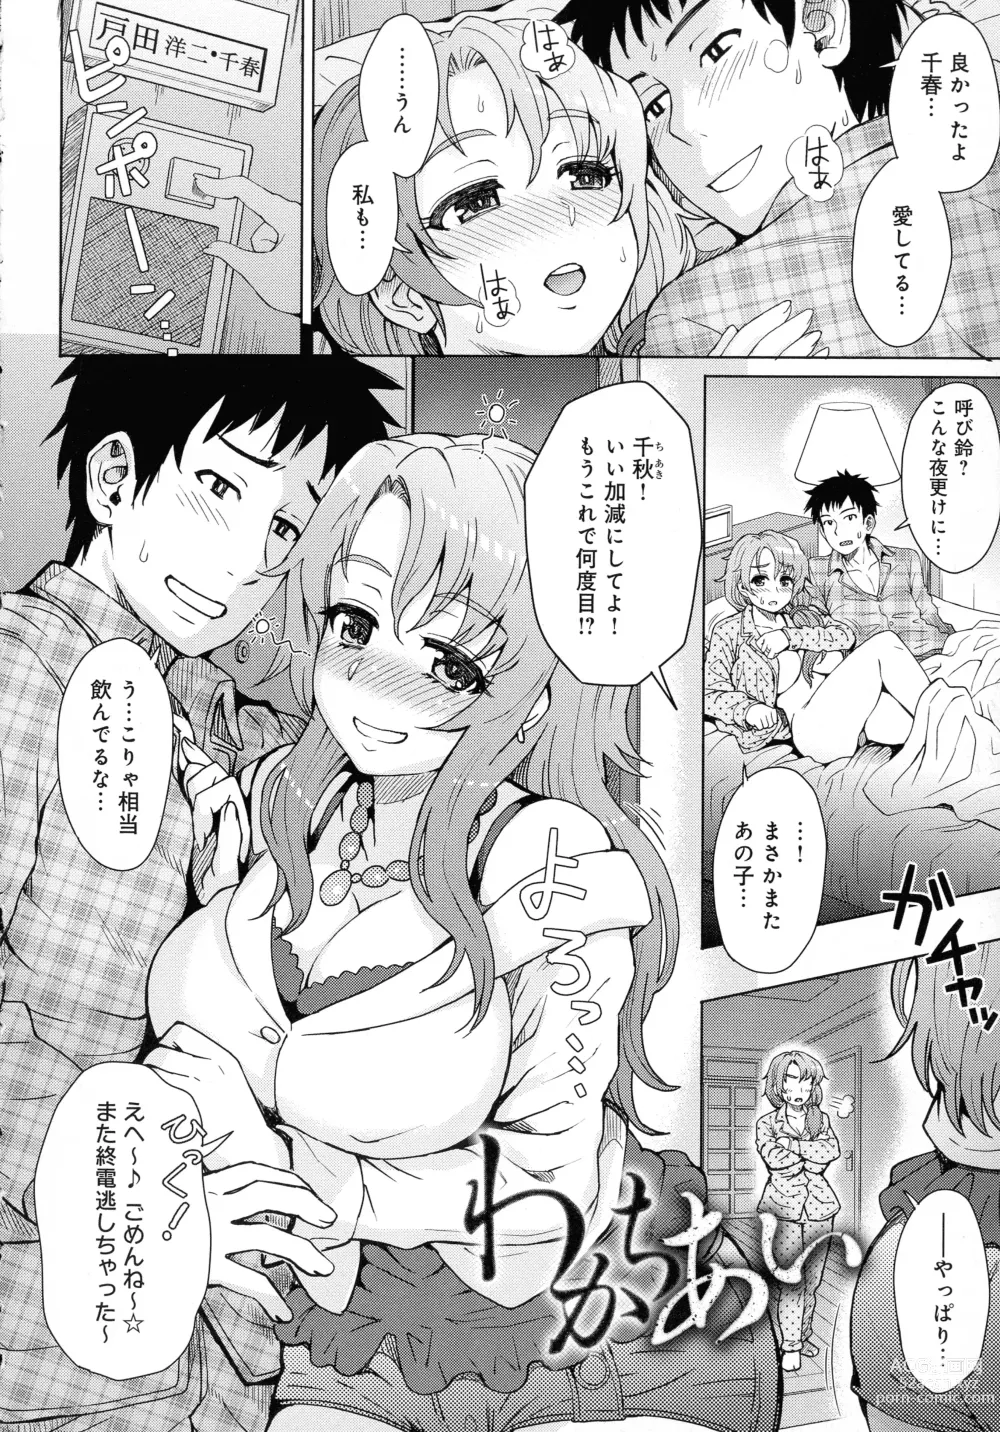 Page 2 of doujinshi Shared Love